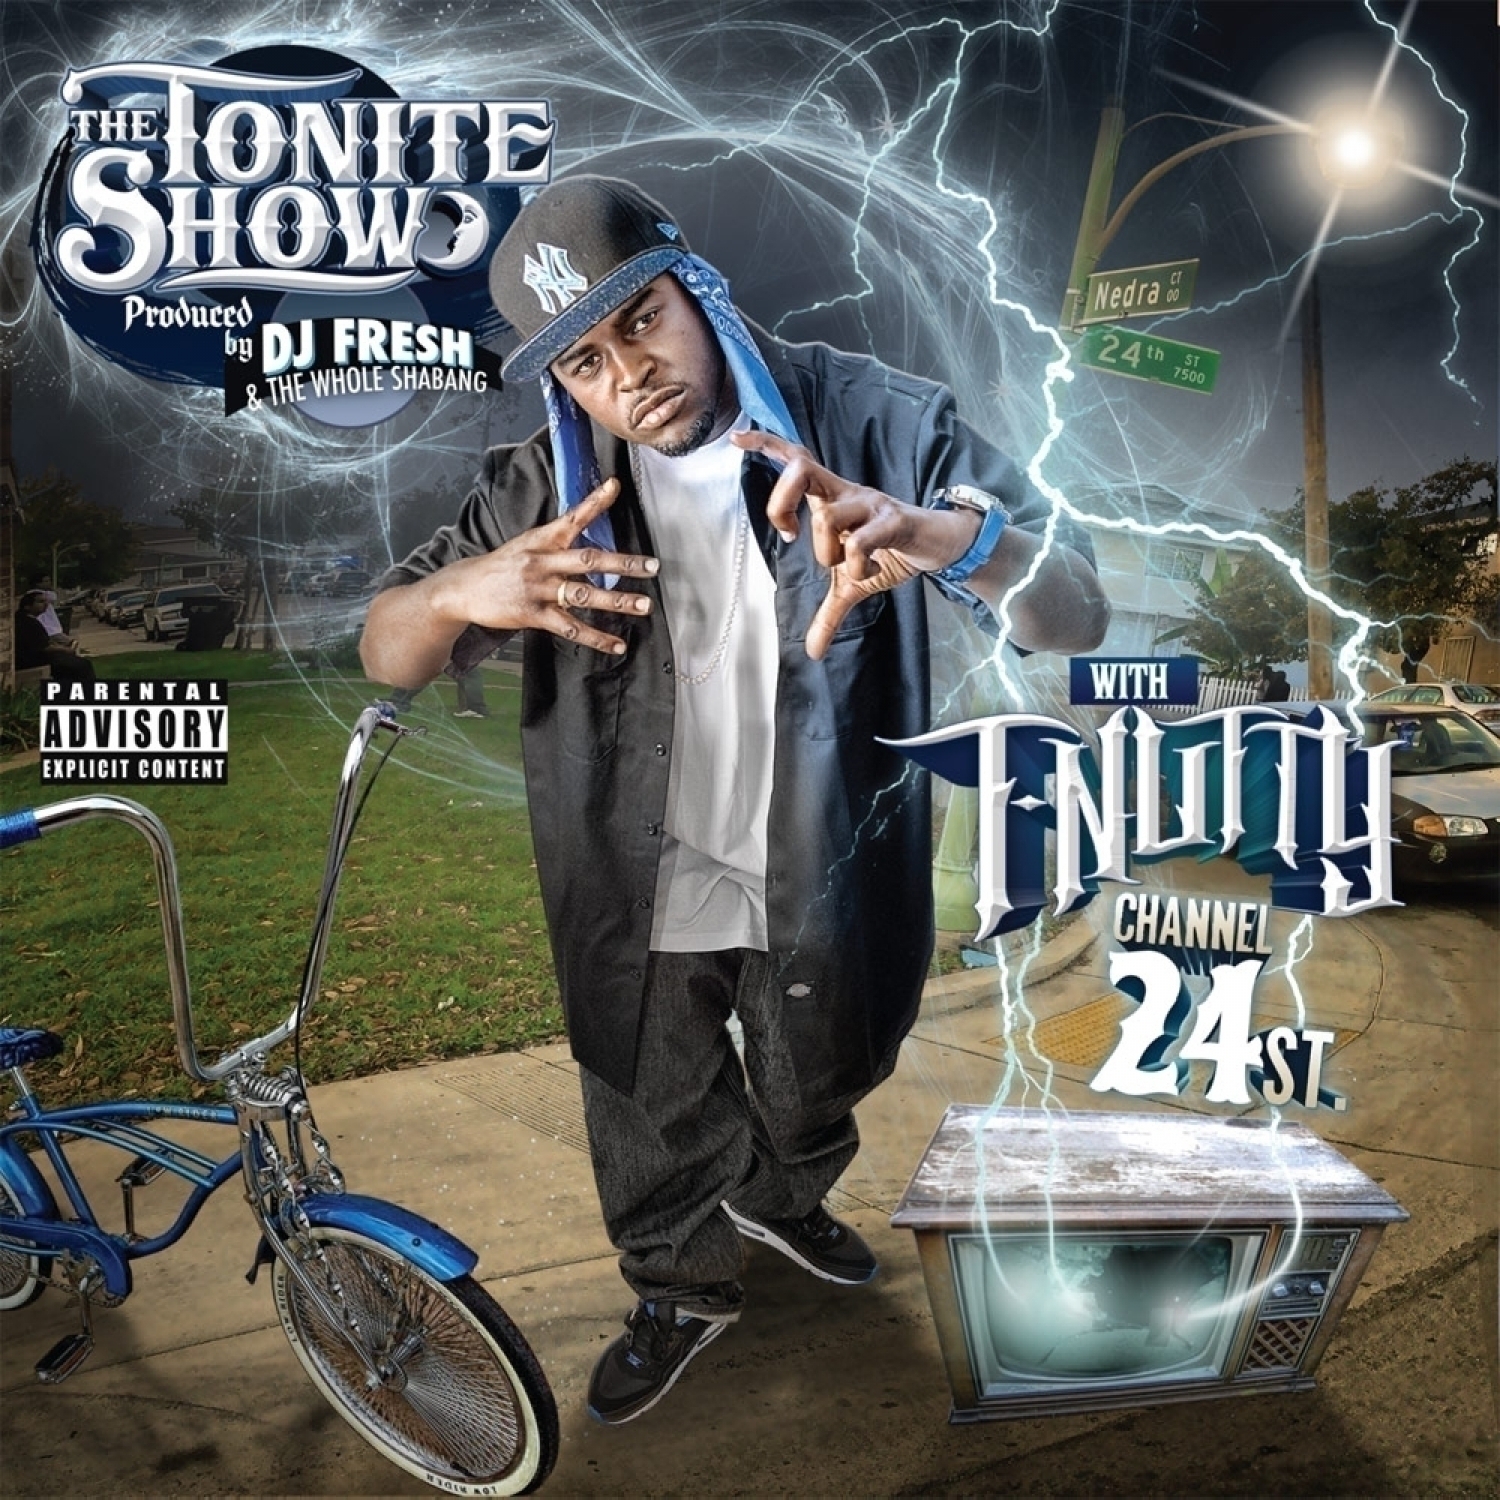 The Tonite Show with T-Nutty: Channel 24 St.